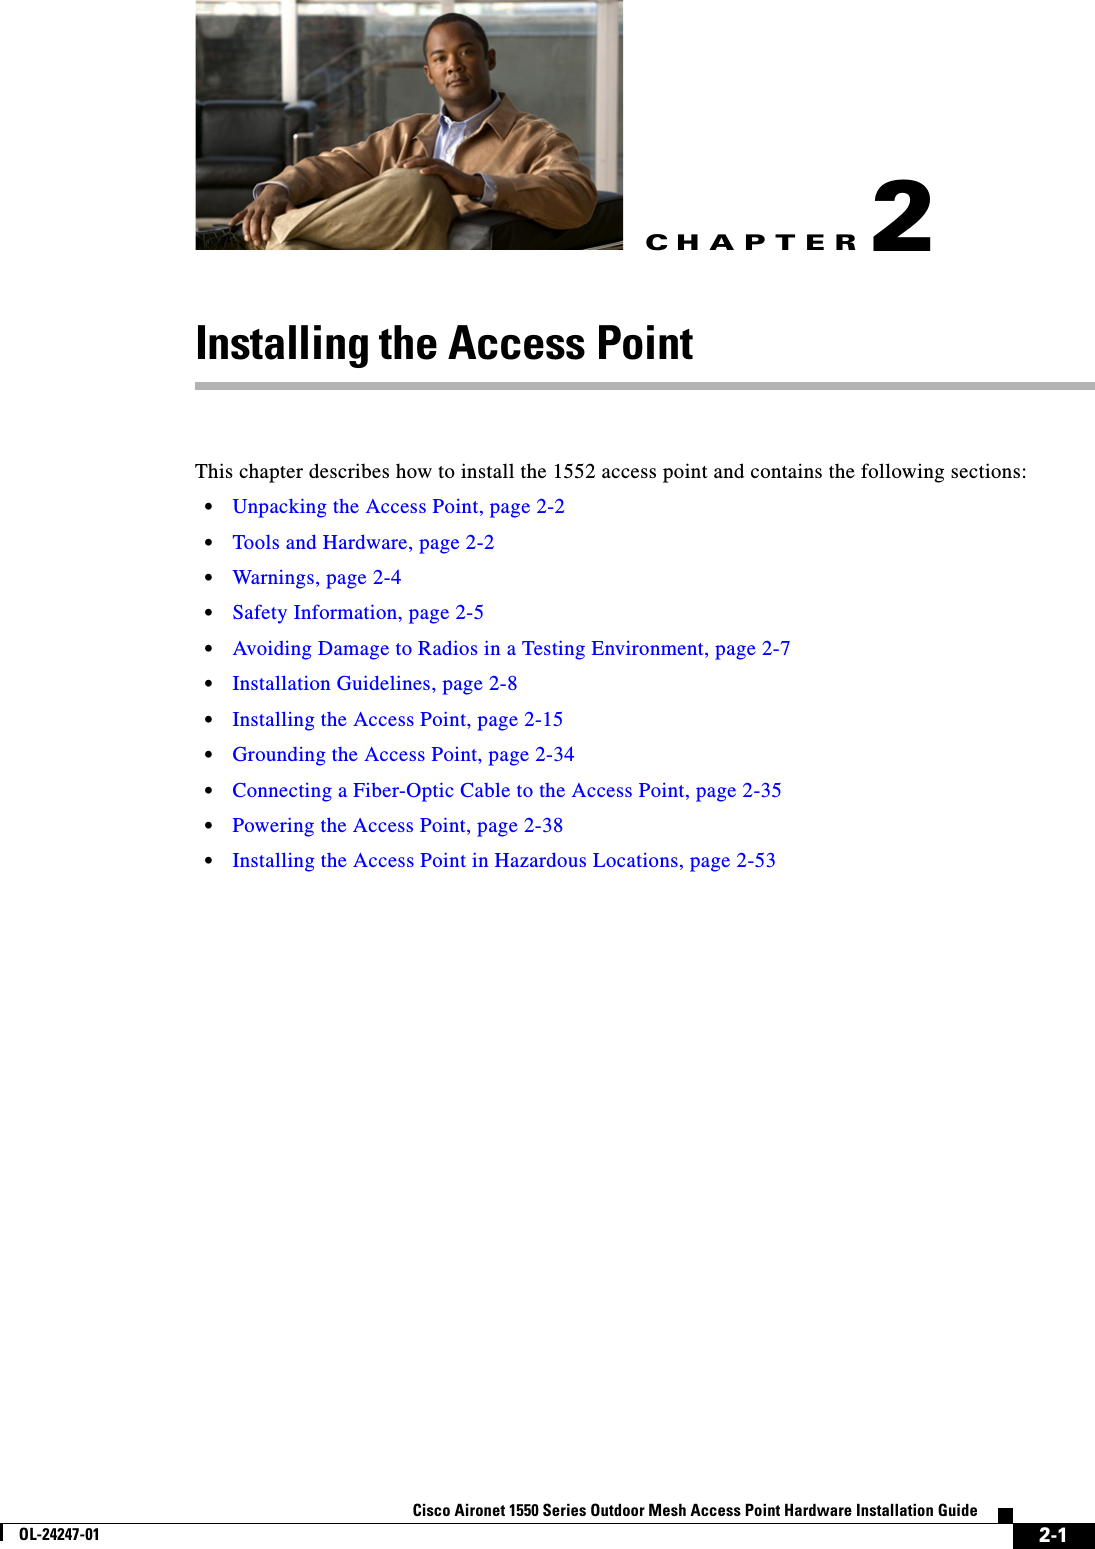 CHAPTER 2-1Cisco Aironet 1550 Series Outdoor Mesh Access Point Hardware Installation GuideOL-24247-012Installing the Access PointThis chapter describes how to install the 1552 access point and contains the following sections:•Unpacking the Access Point, page 2-2•Tools and Hardware, page 2-2•Warnings, page 2-4•Safety Information, page 2-5•Avoiding Damage to Radios in a Testing Environment, page 2-7•Installation Guidelines, page 2-8•Installing the Access Point, page 2-15•Grounding the Access Point, page 2-34•Connecting a Fiber-Optic Cable to the Access Point, page 2-35•Powering the Access Point, page 2-38•Installing the Access Point in Hazardous Locations, page 2-53